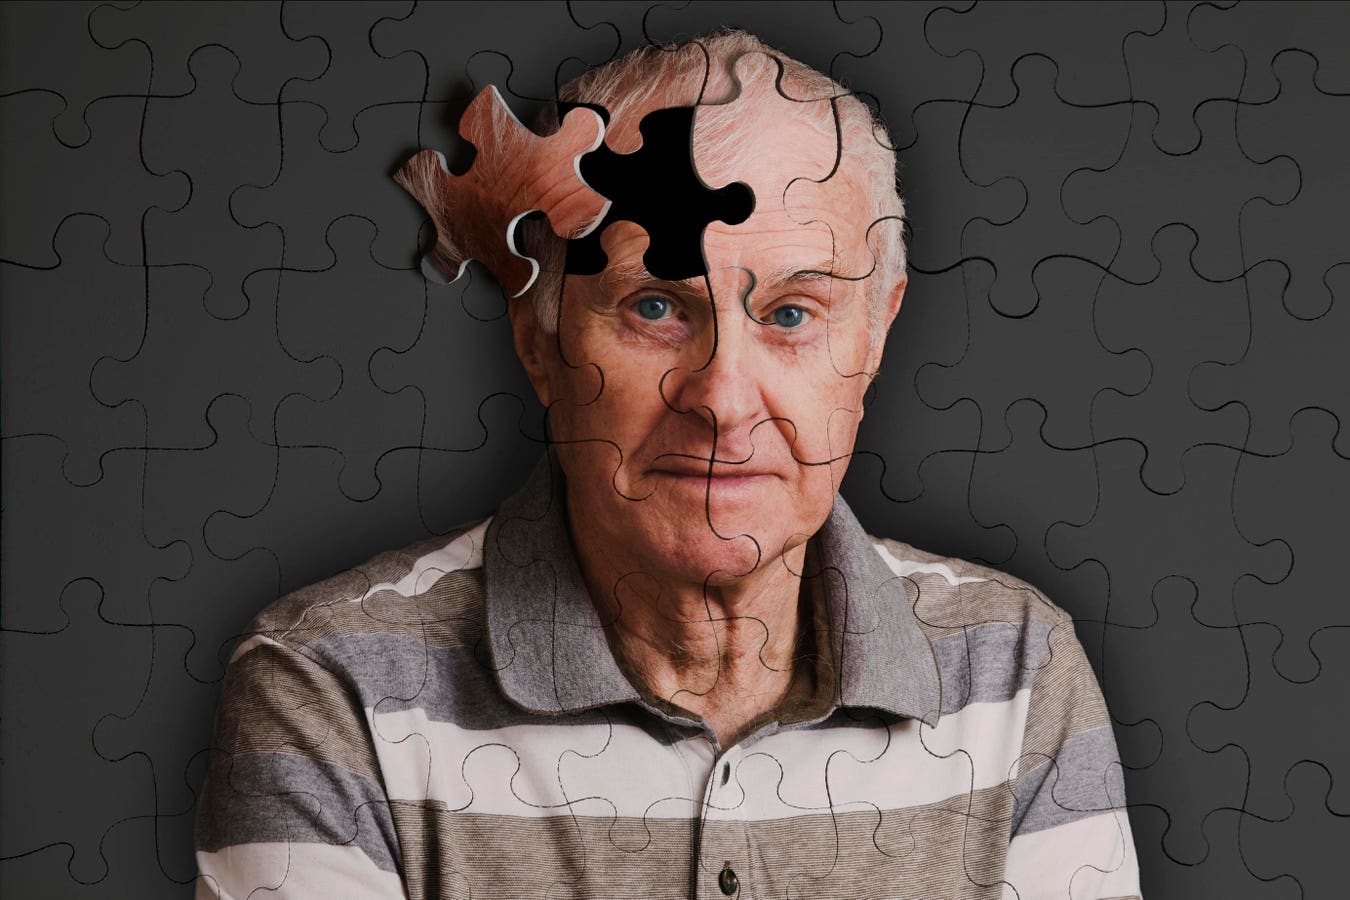 How to prevent Alzheimer's disease: a case for vaccines